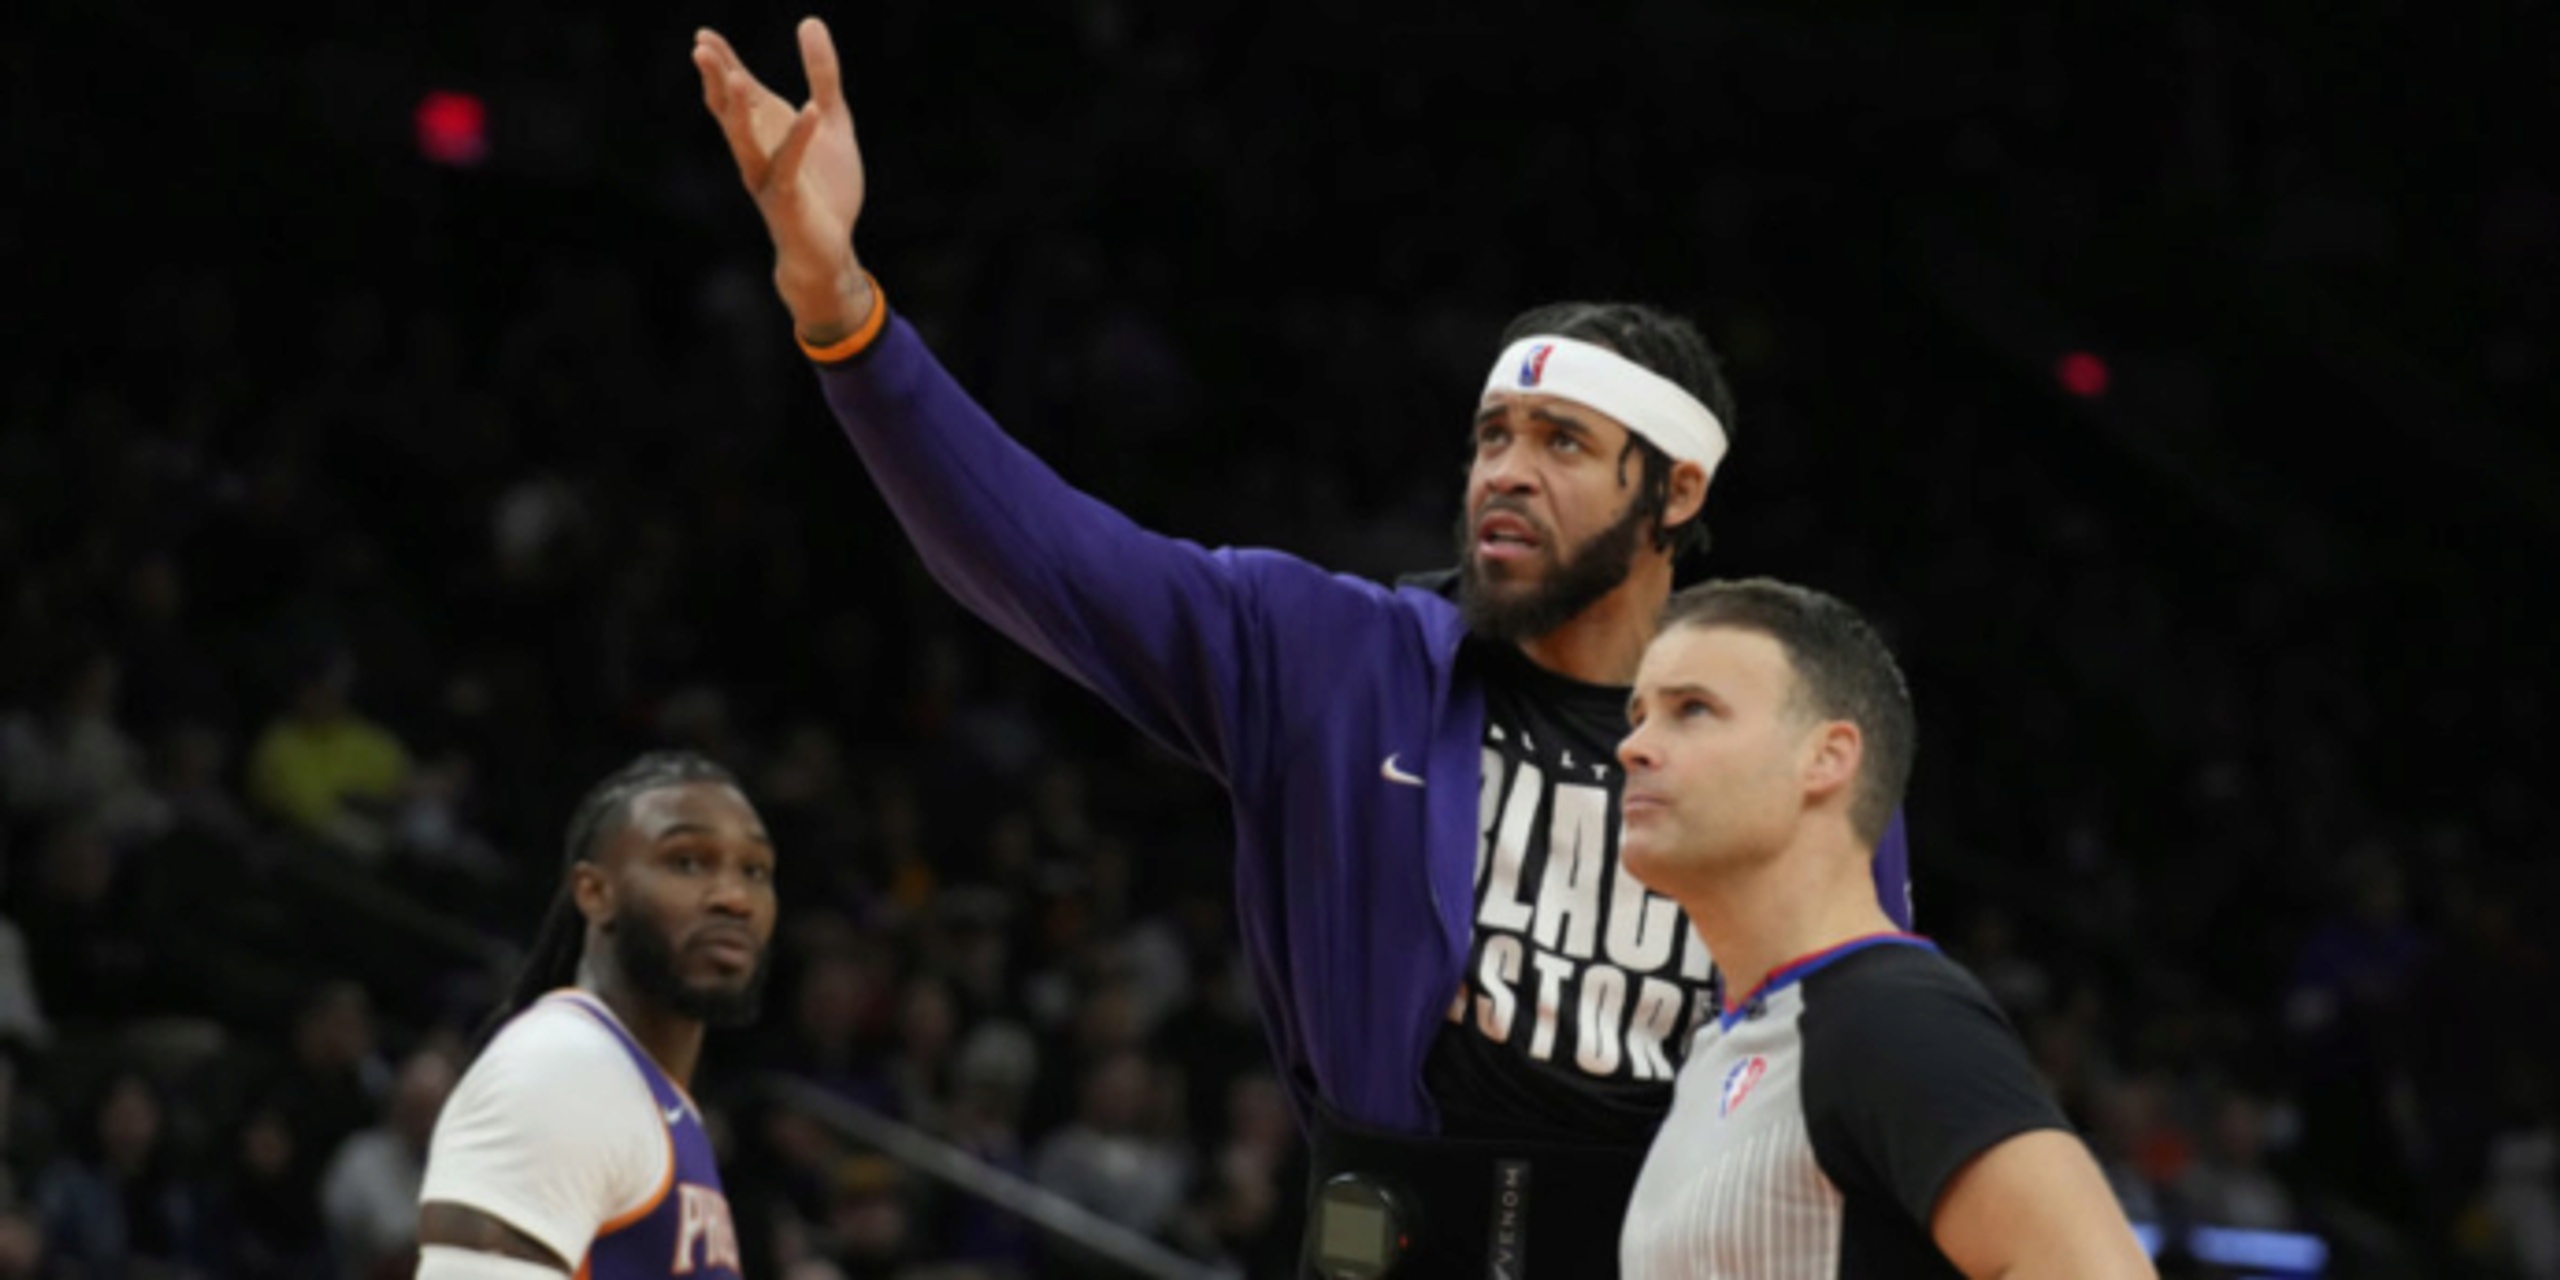 JaVale McGee explains confrontation with fan: 'He was talking crazy'